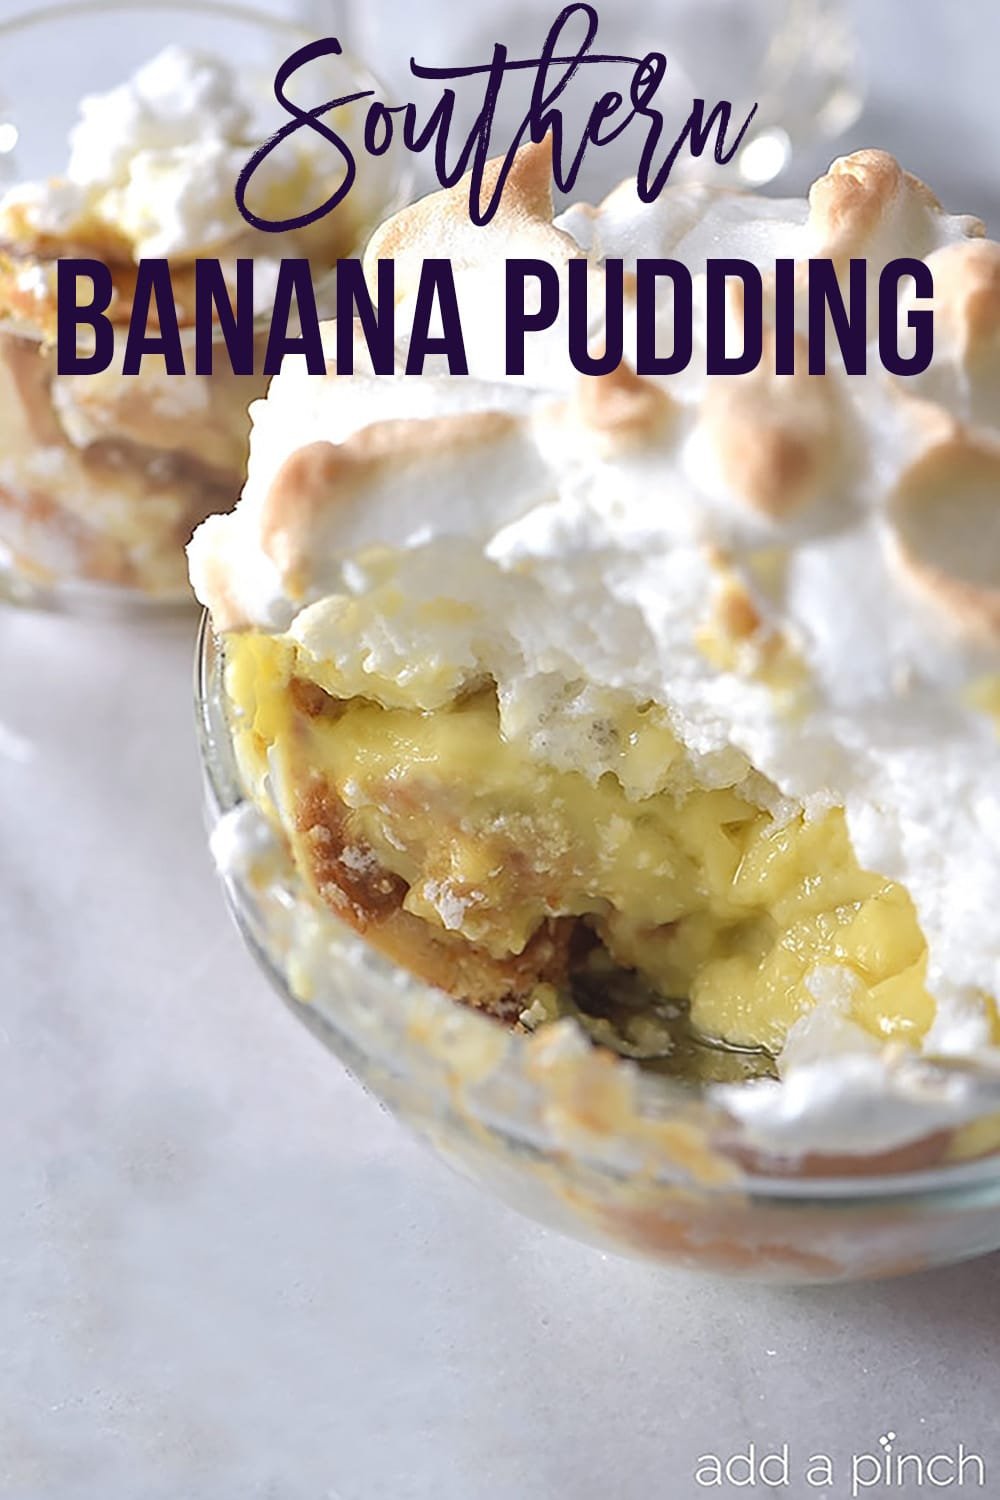 Southern Banana Pudding in glass bowl and a glass dessert dish - with text - addapinch.com